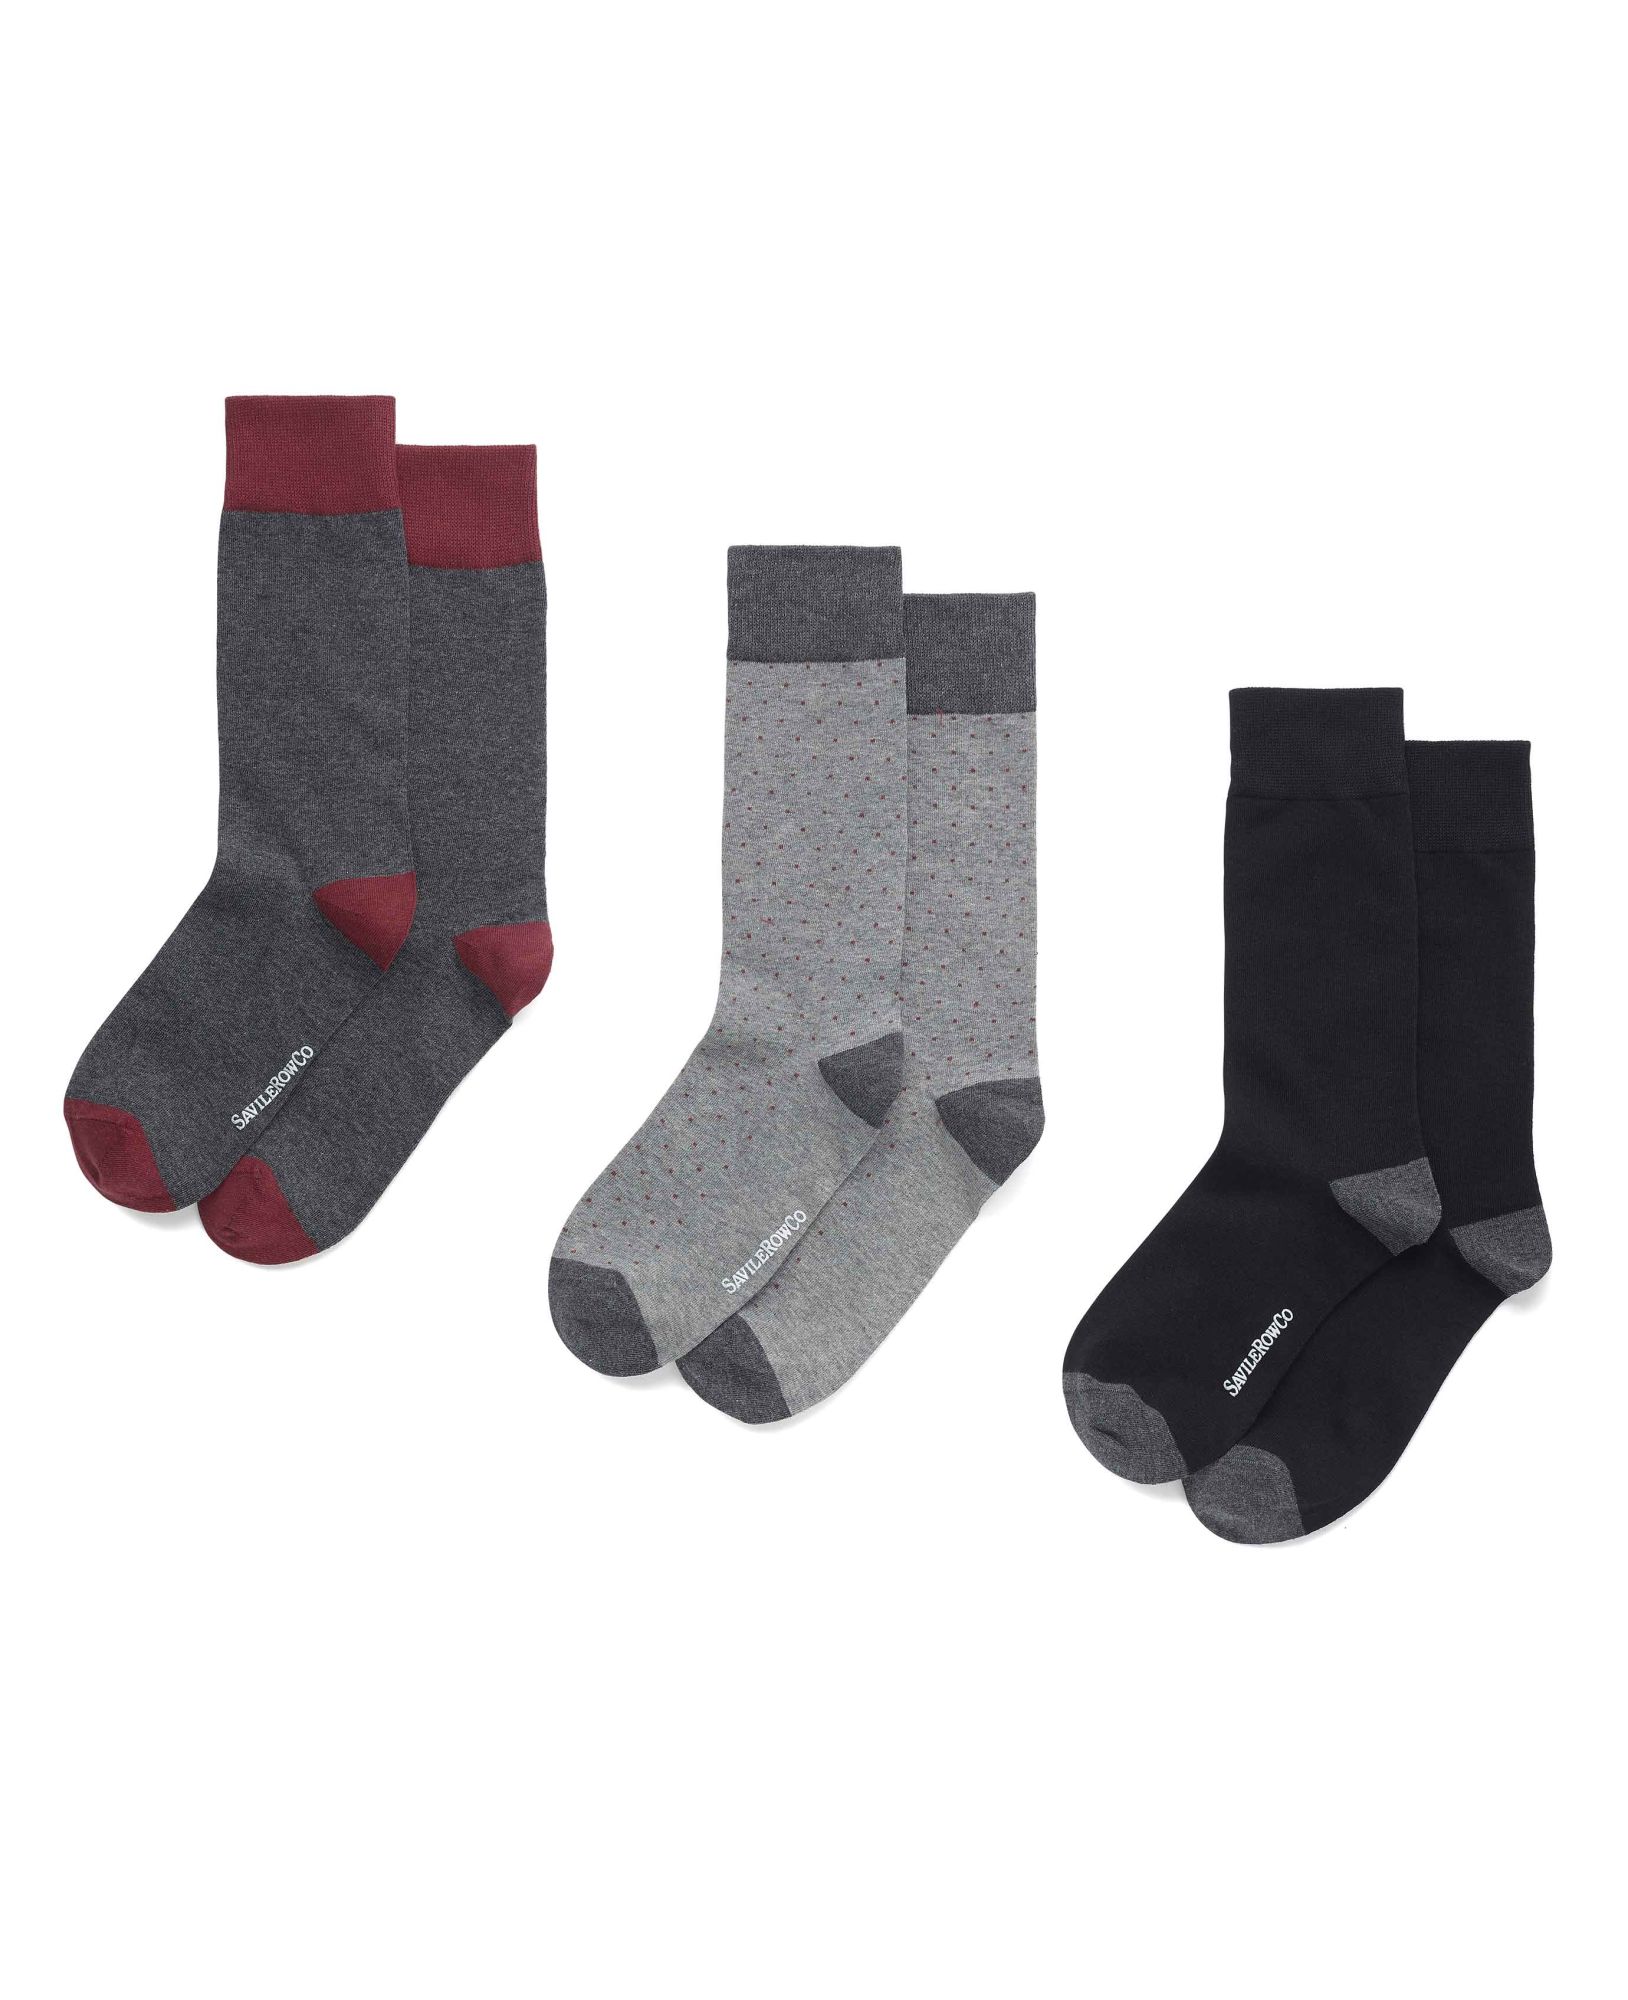 Image of Black Combed Cotton-Blend Three Pack Assorted Socks 43/46